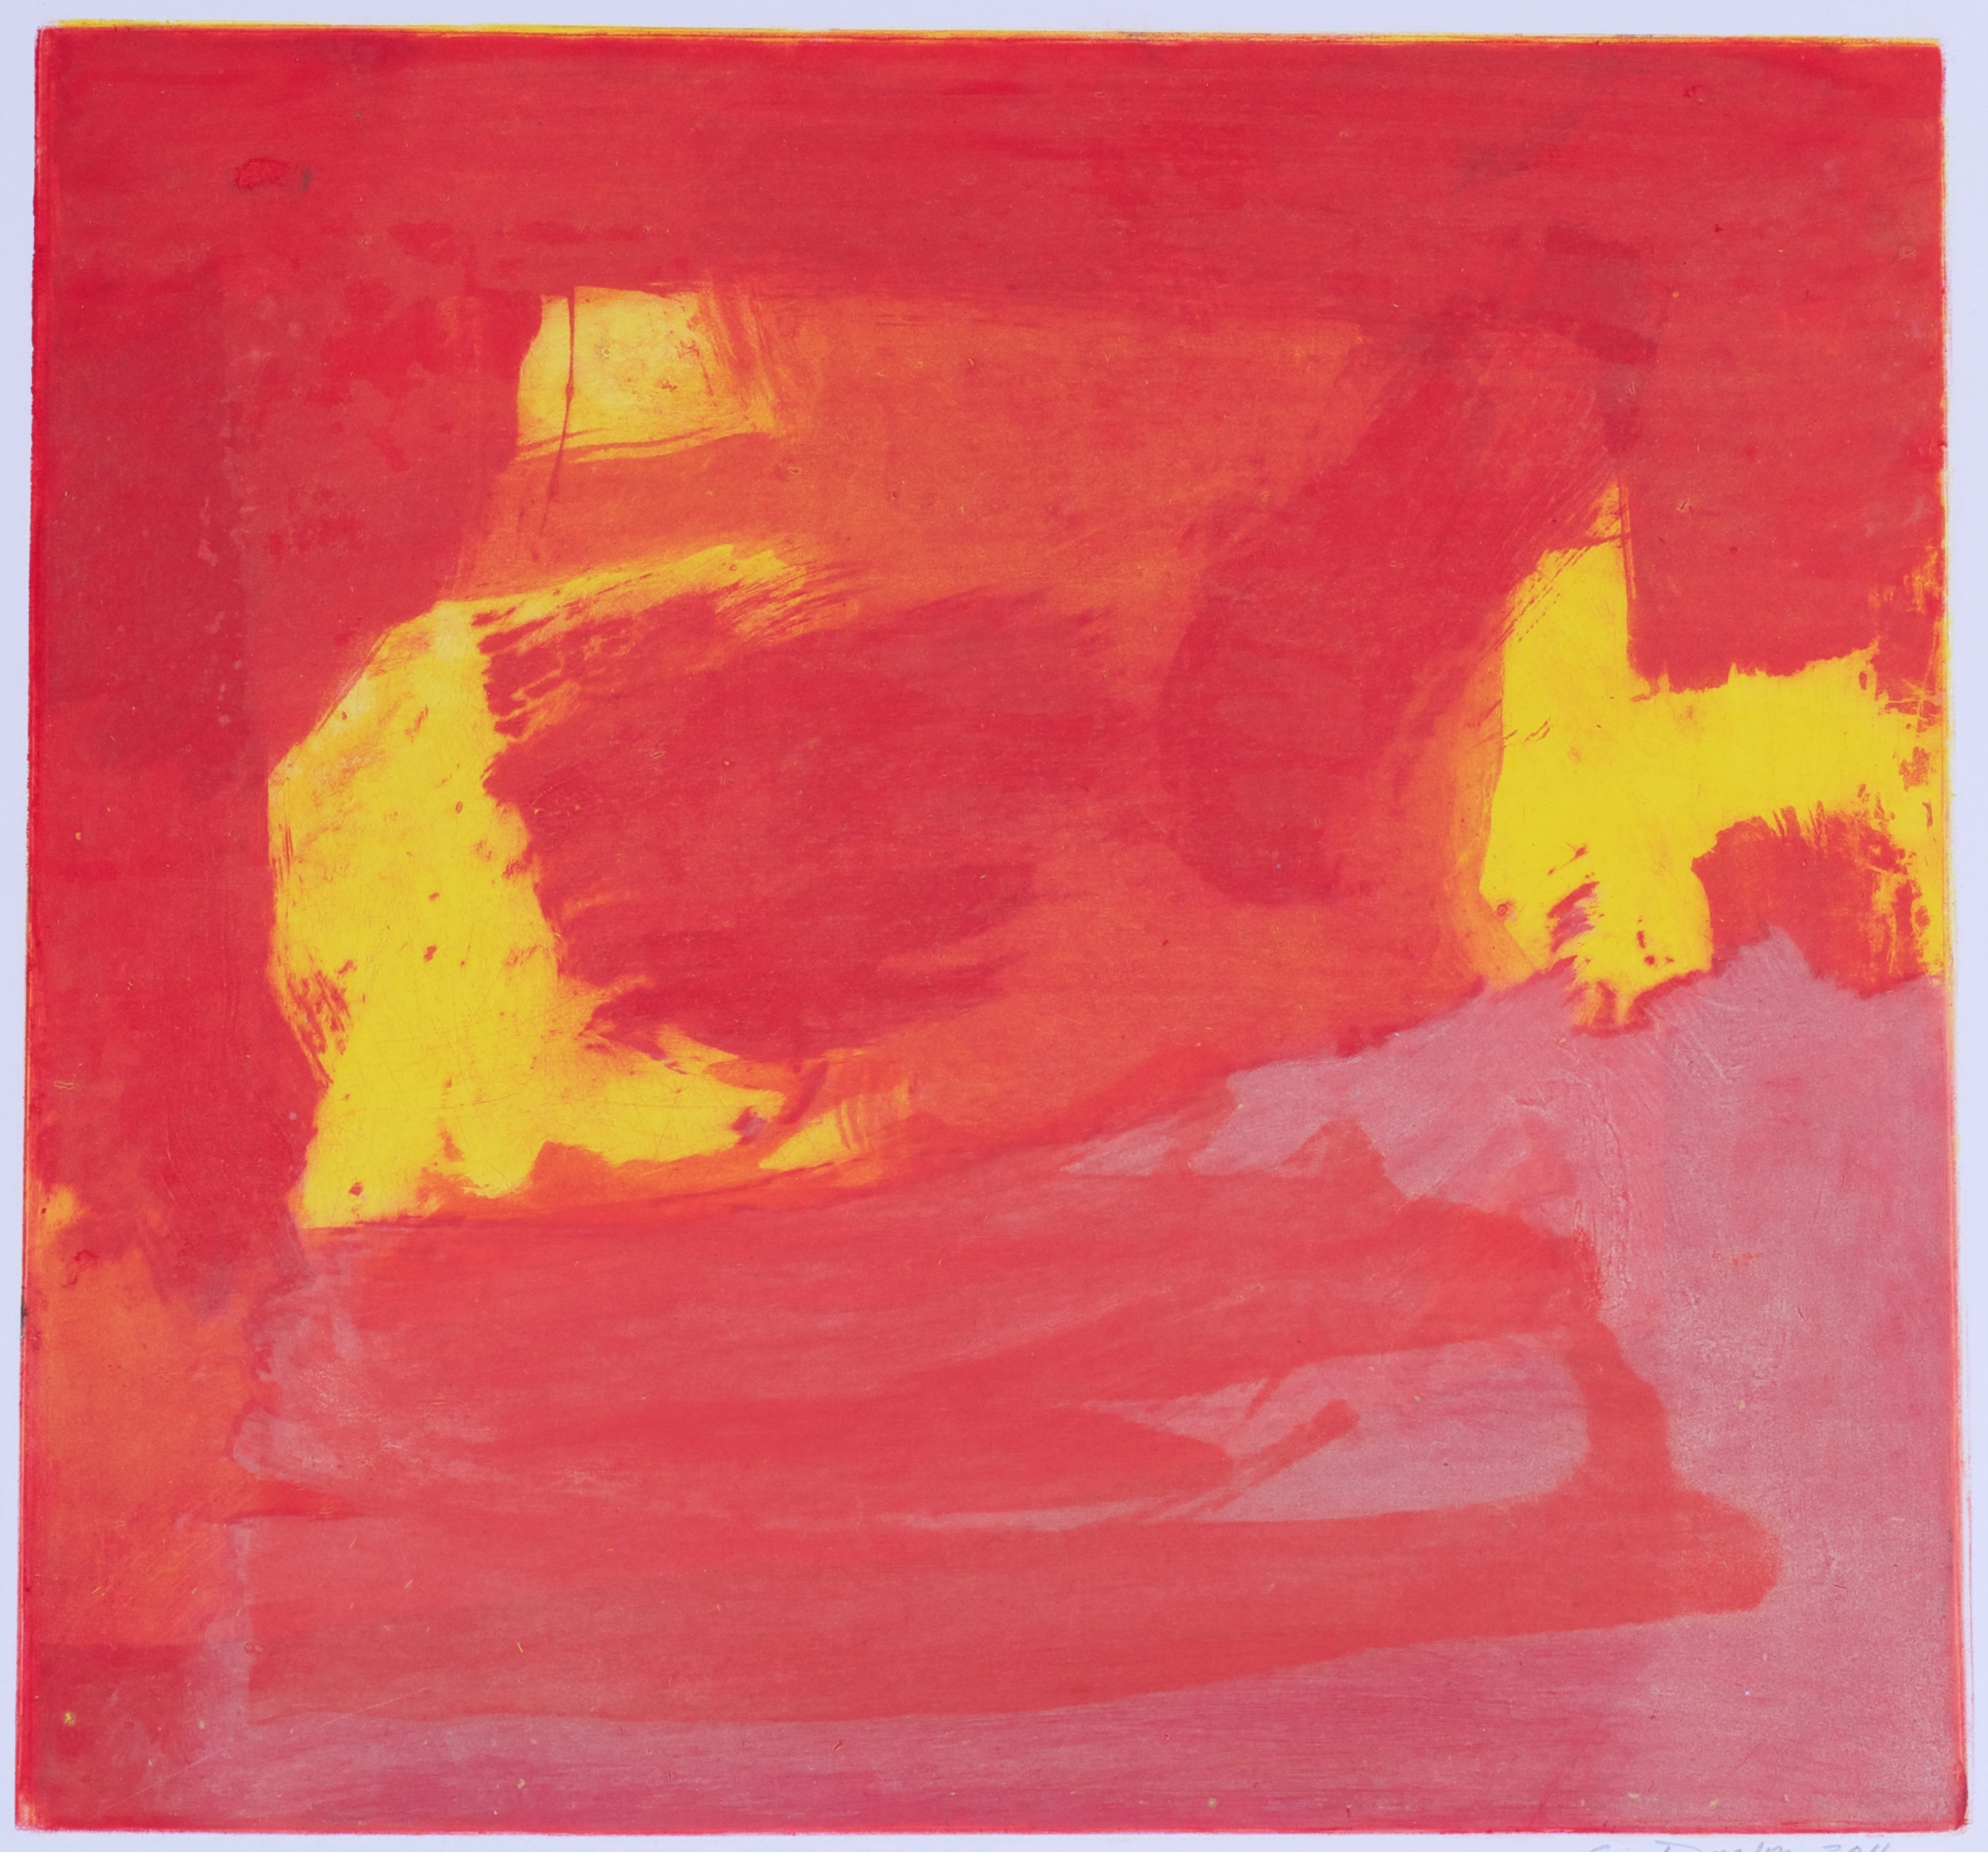 Monoprint on paper of red brustrokes moving from side to side, with a yellow form on the left and right of the composition.